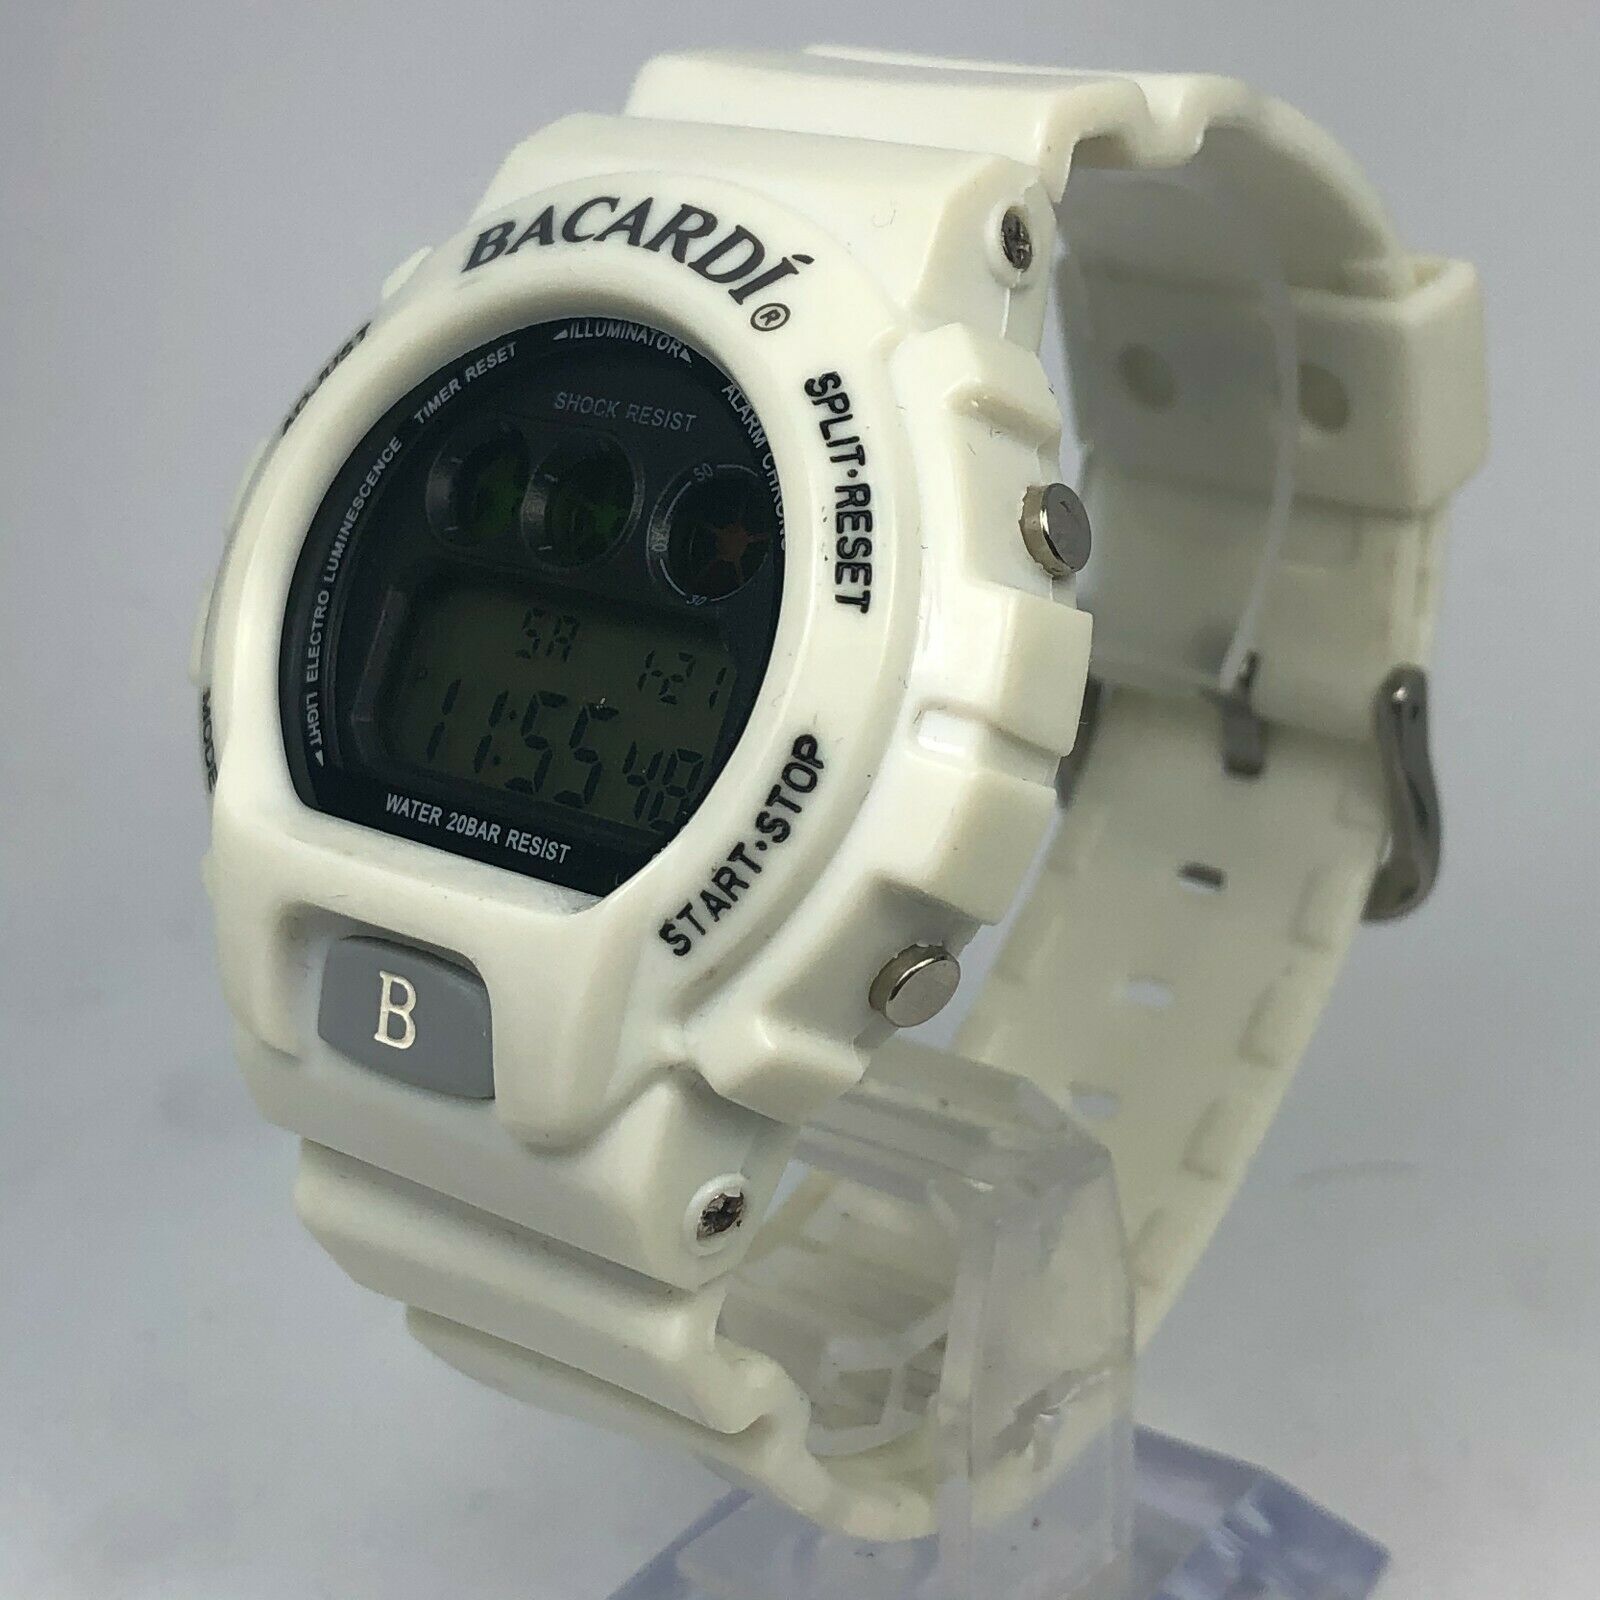 reloj bacardi - Buy Watches from other current brands on todocoleccion